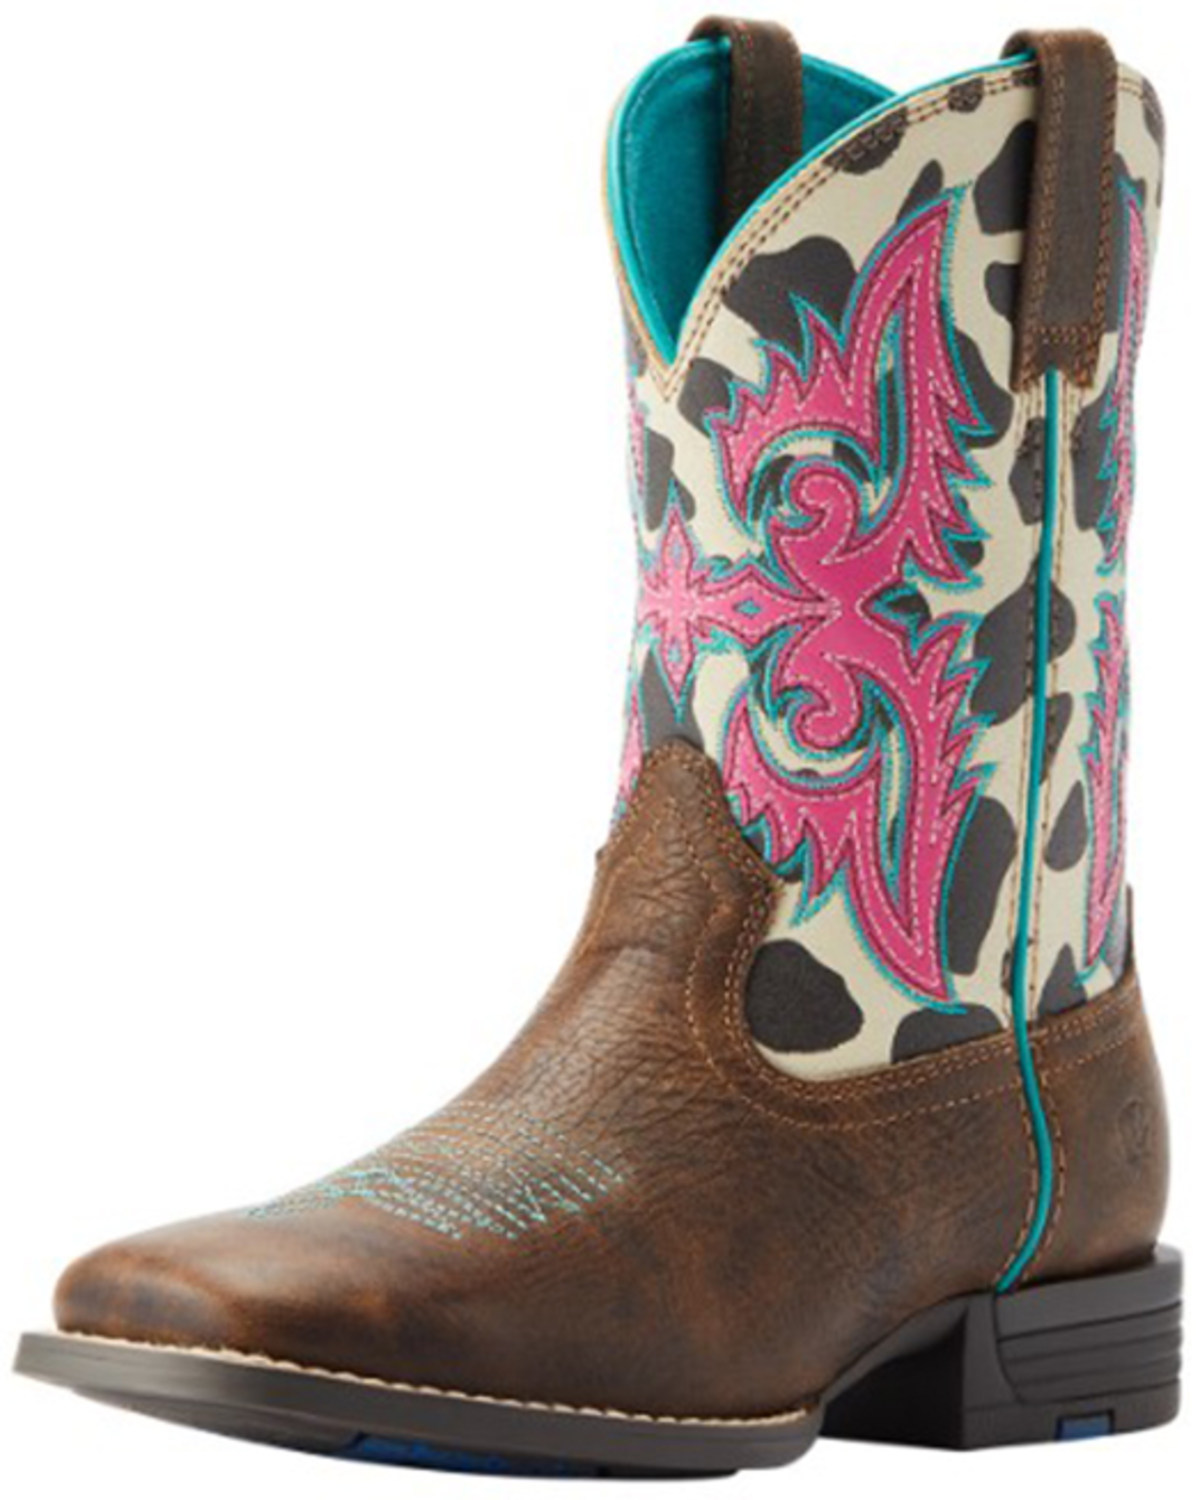 Ariat Girls' Lonestar Rowdy Western Boots - Broad Square Toe